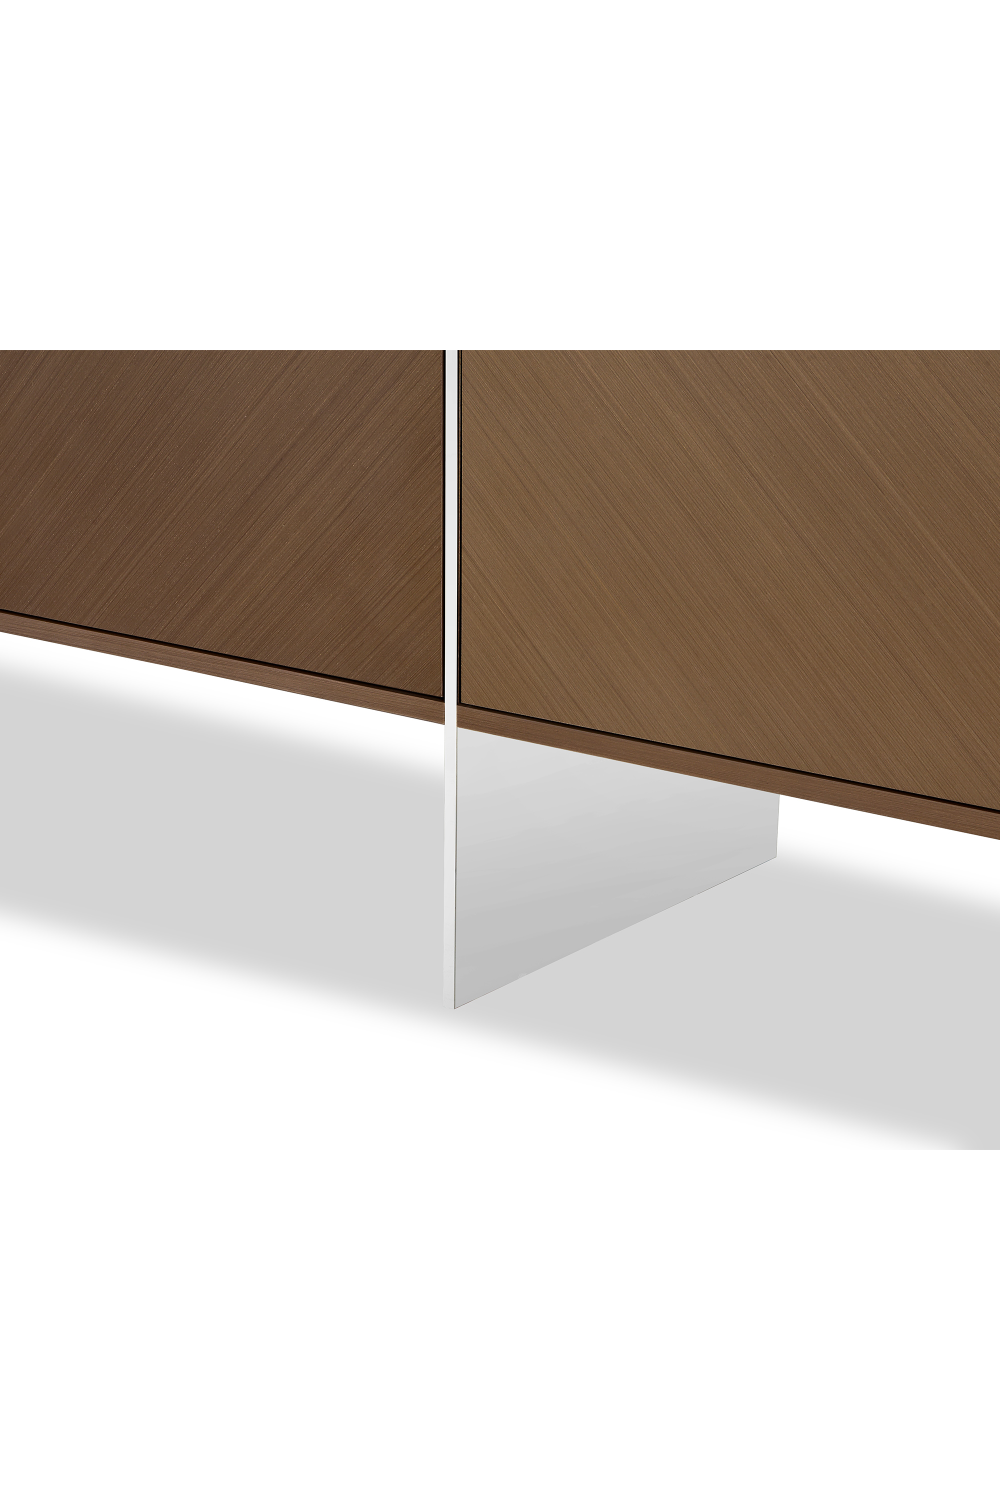 Brown Wooden Contemporary Sideboard | Liang & Eimil Nautilus | OROA.com